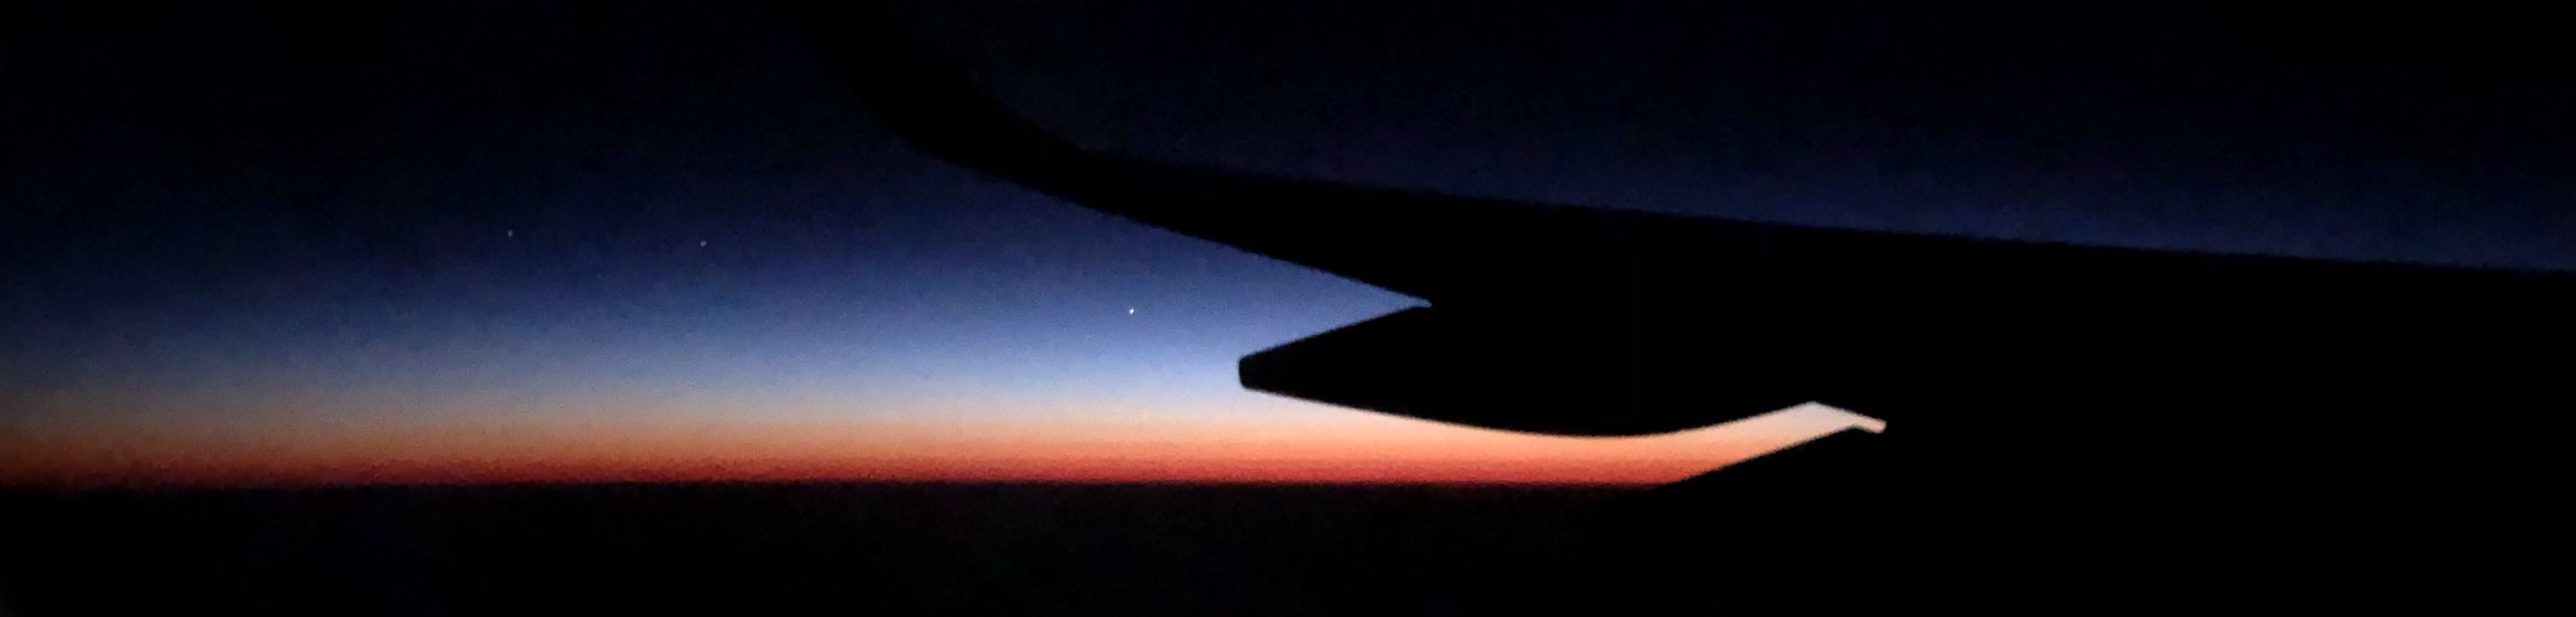 Sunrise from the plane